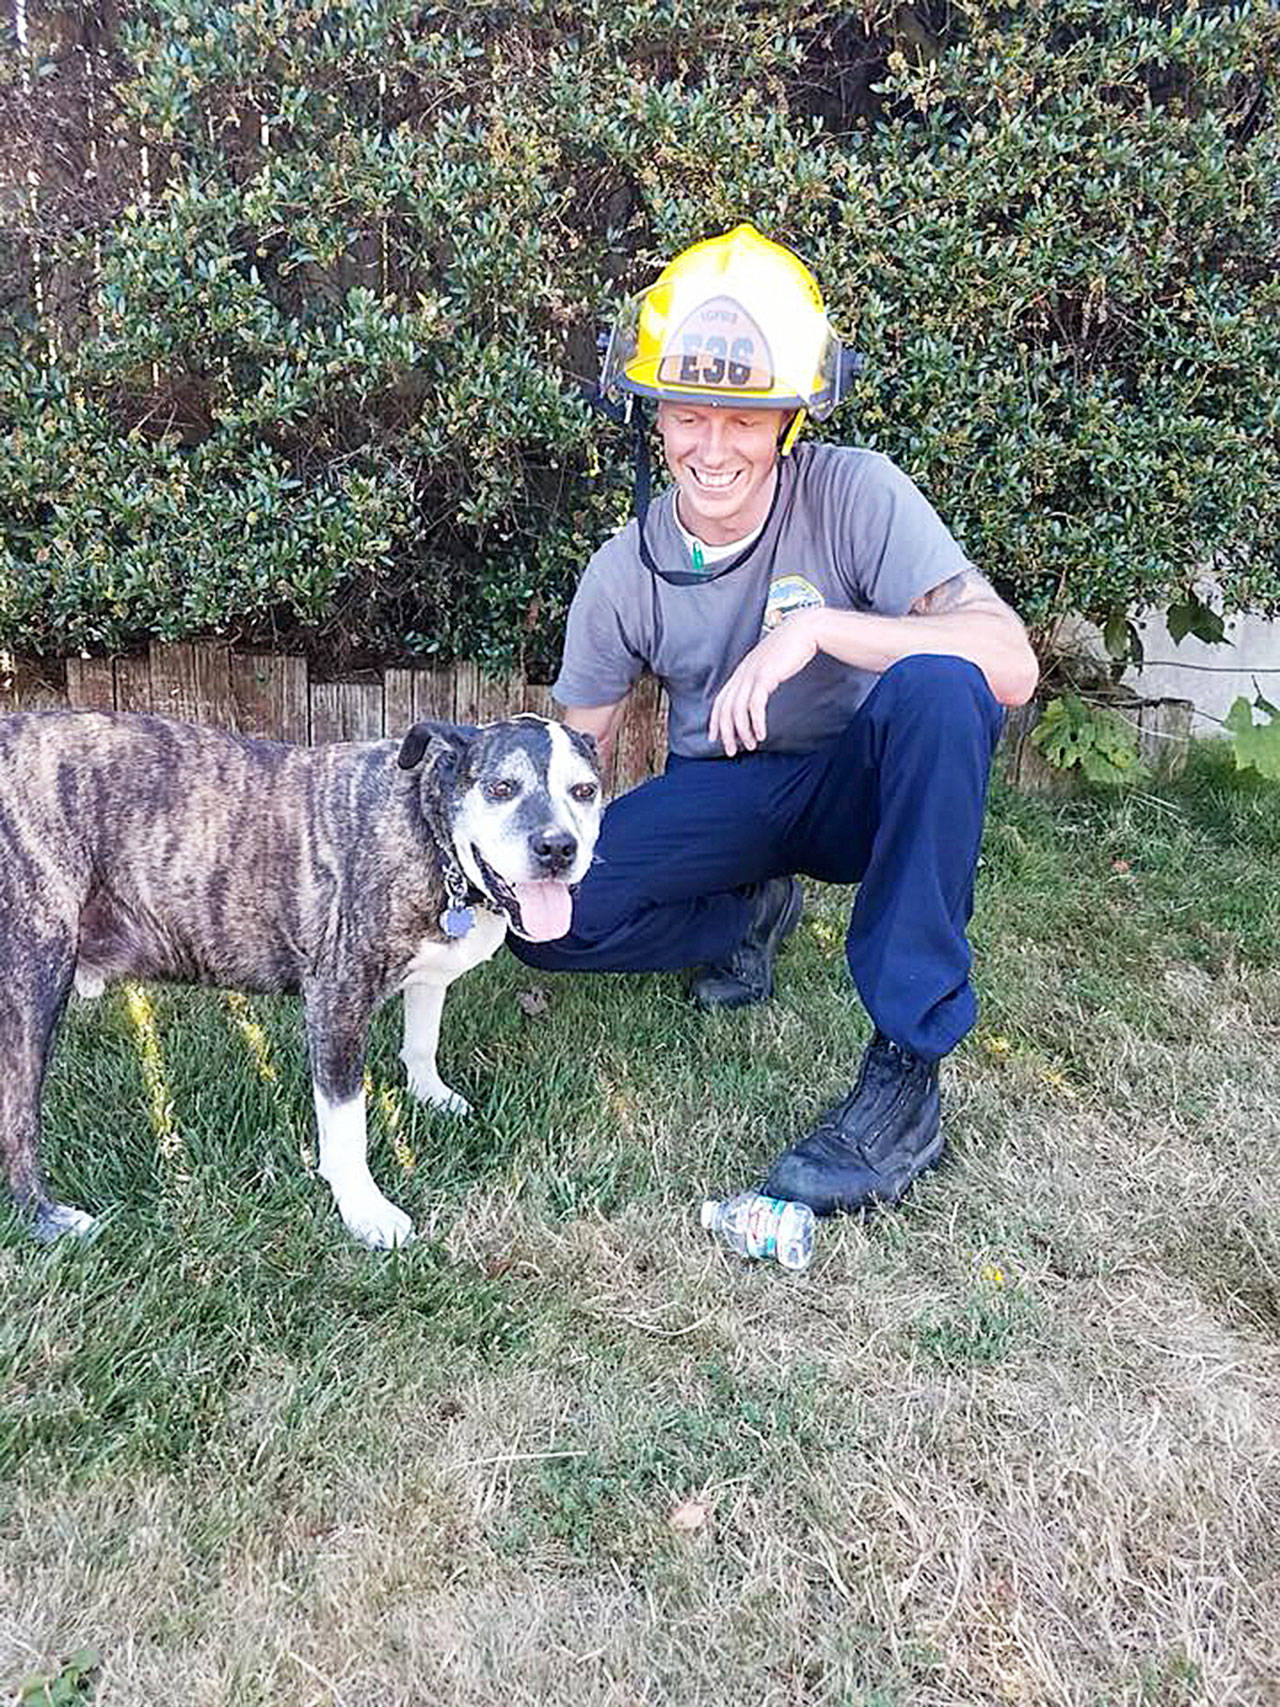 Firefighter Billy Piepenbrink kneels with his new furry friend Wednesday after rescuing the dog that fell about 20 feet down the bluff at Deer Lagoon. Photo provided